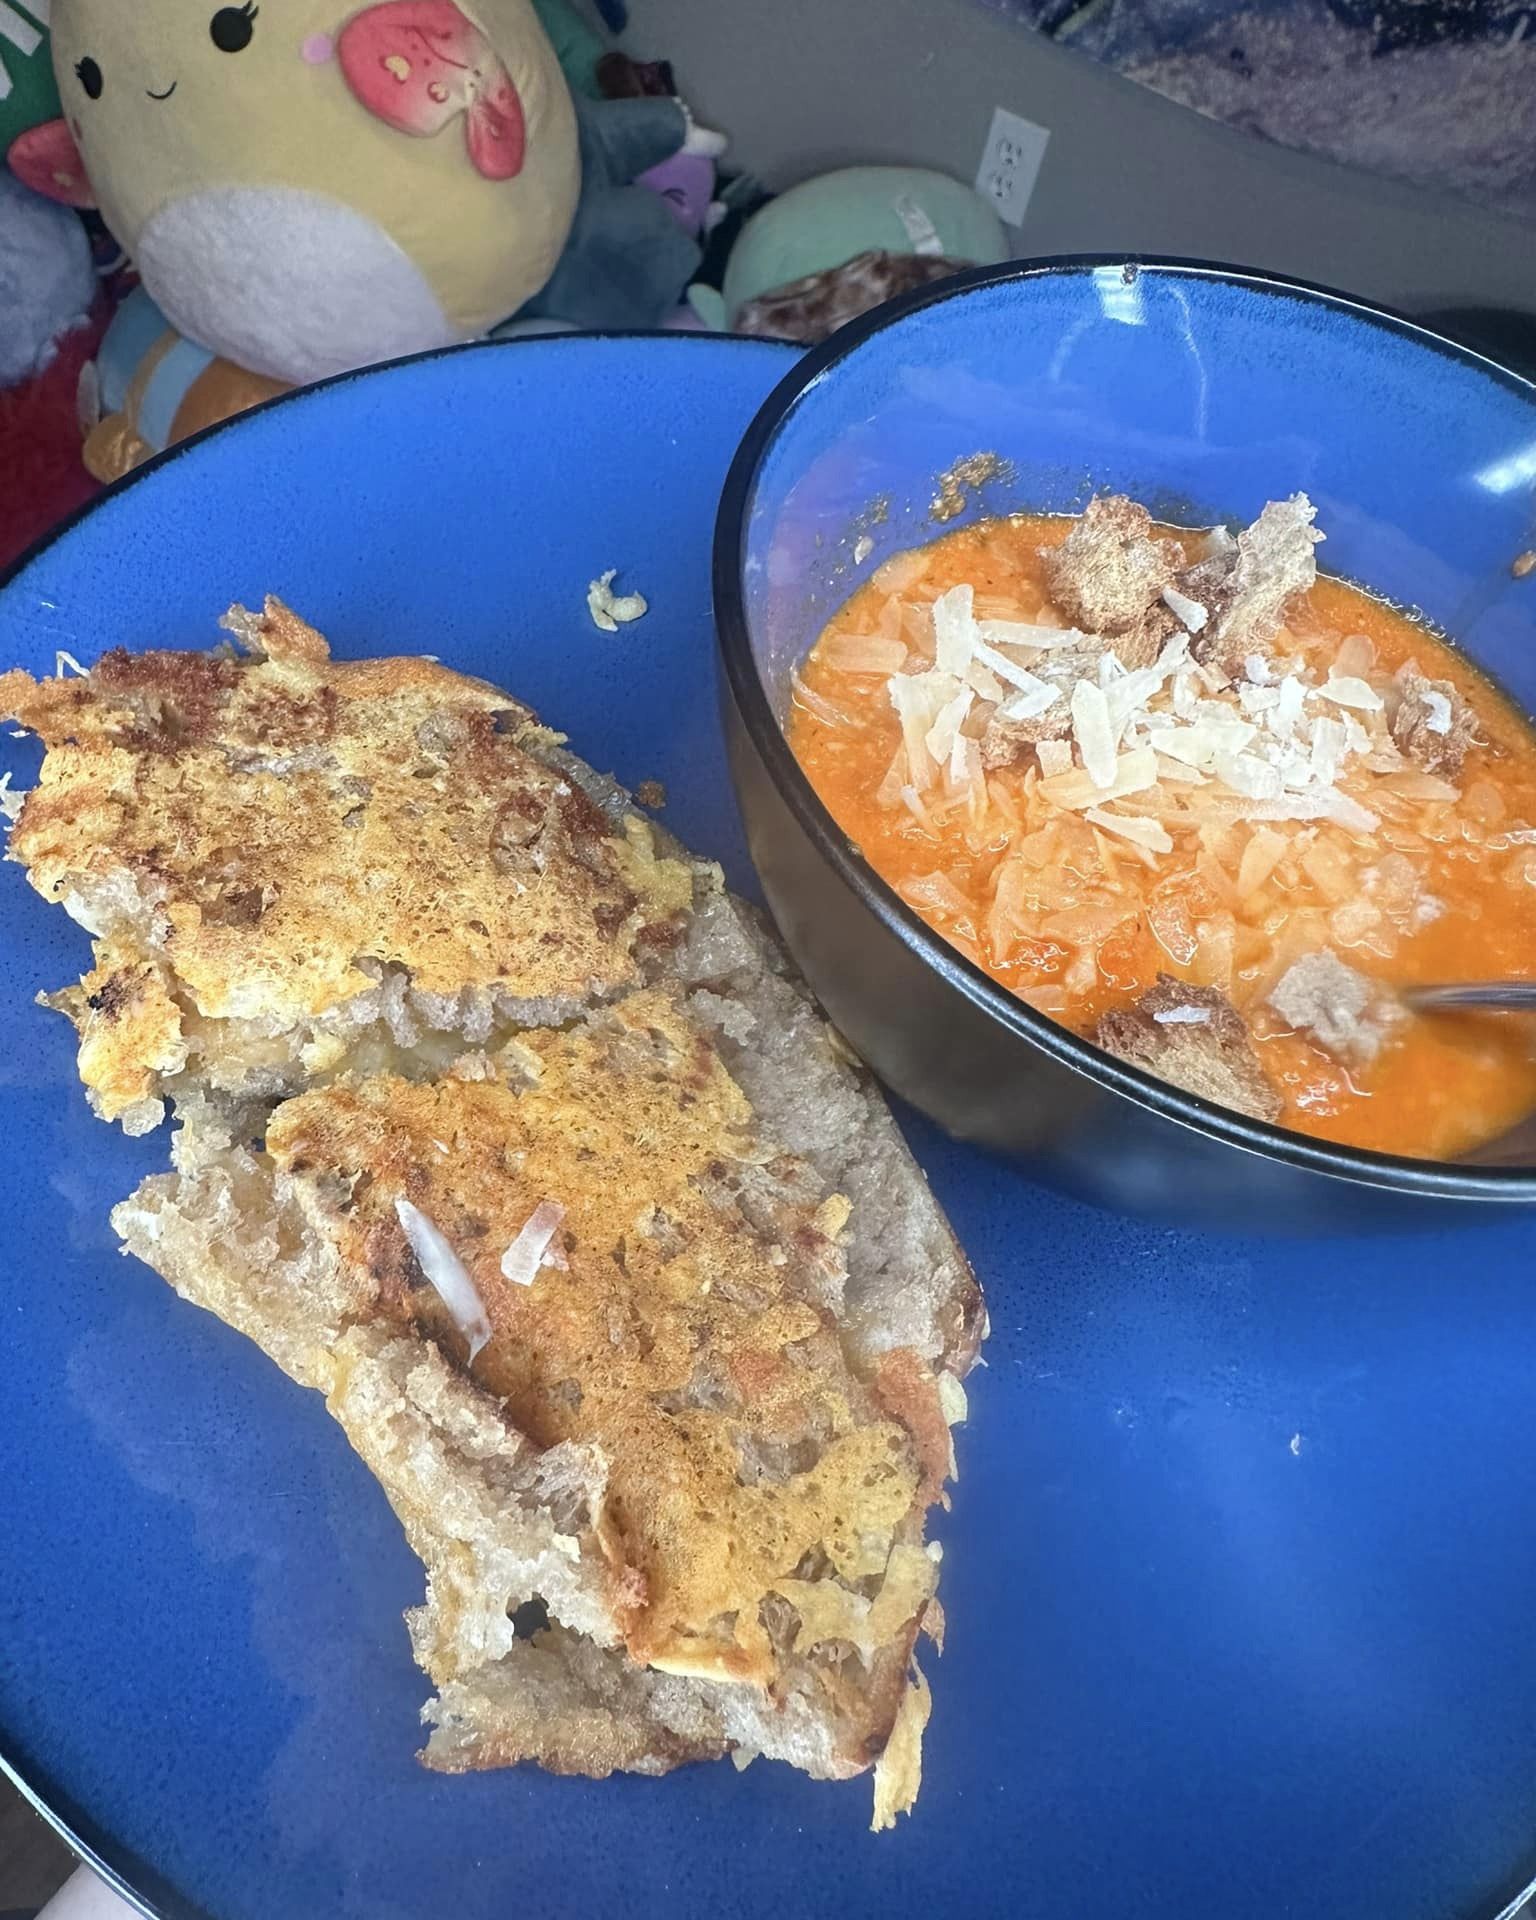 The best loaf I’ve made yet! It had some blowout in the side, I know that’s the big no-no with sourdough, but I am still learning and this is I think my fifth loaf. 

I made homemade grilled cheese with homemade tomato/carrot soup!! The breadcrumbs are the sourdough pieces that I cut that fell off that I toasted. 🍞🥣